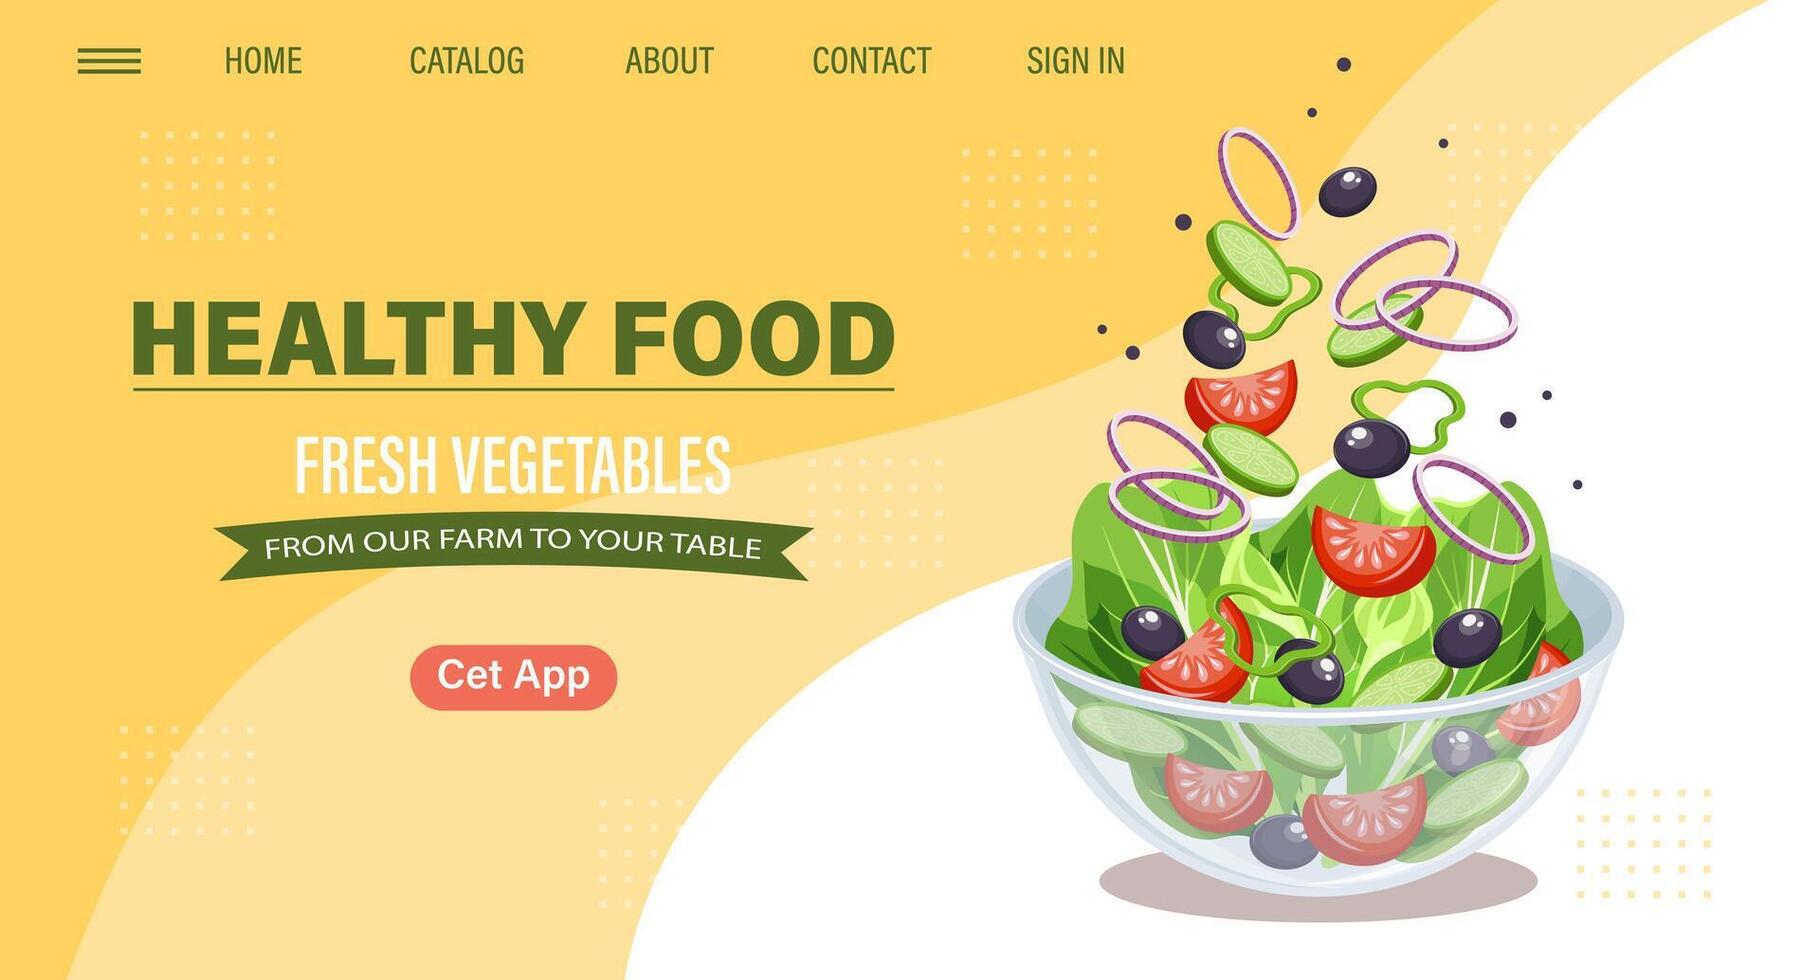 Web page design template for fresh vegetables, natural products, organic food, online food delivery, recipes. Illustration, landing page, poster, banner. vector